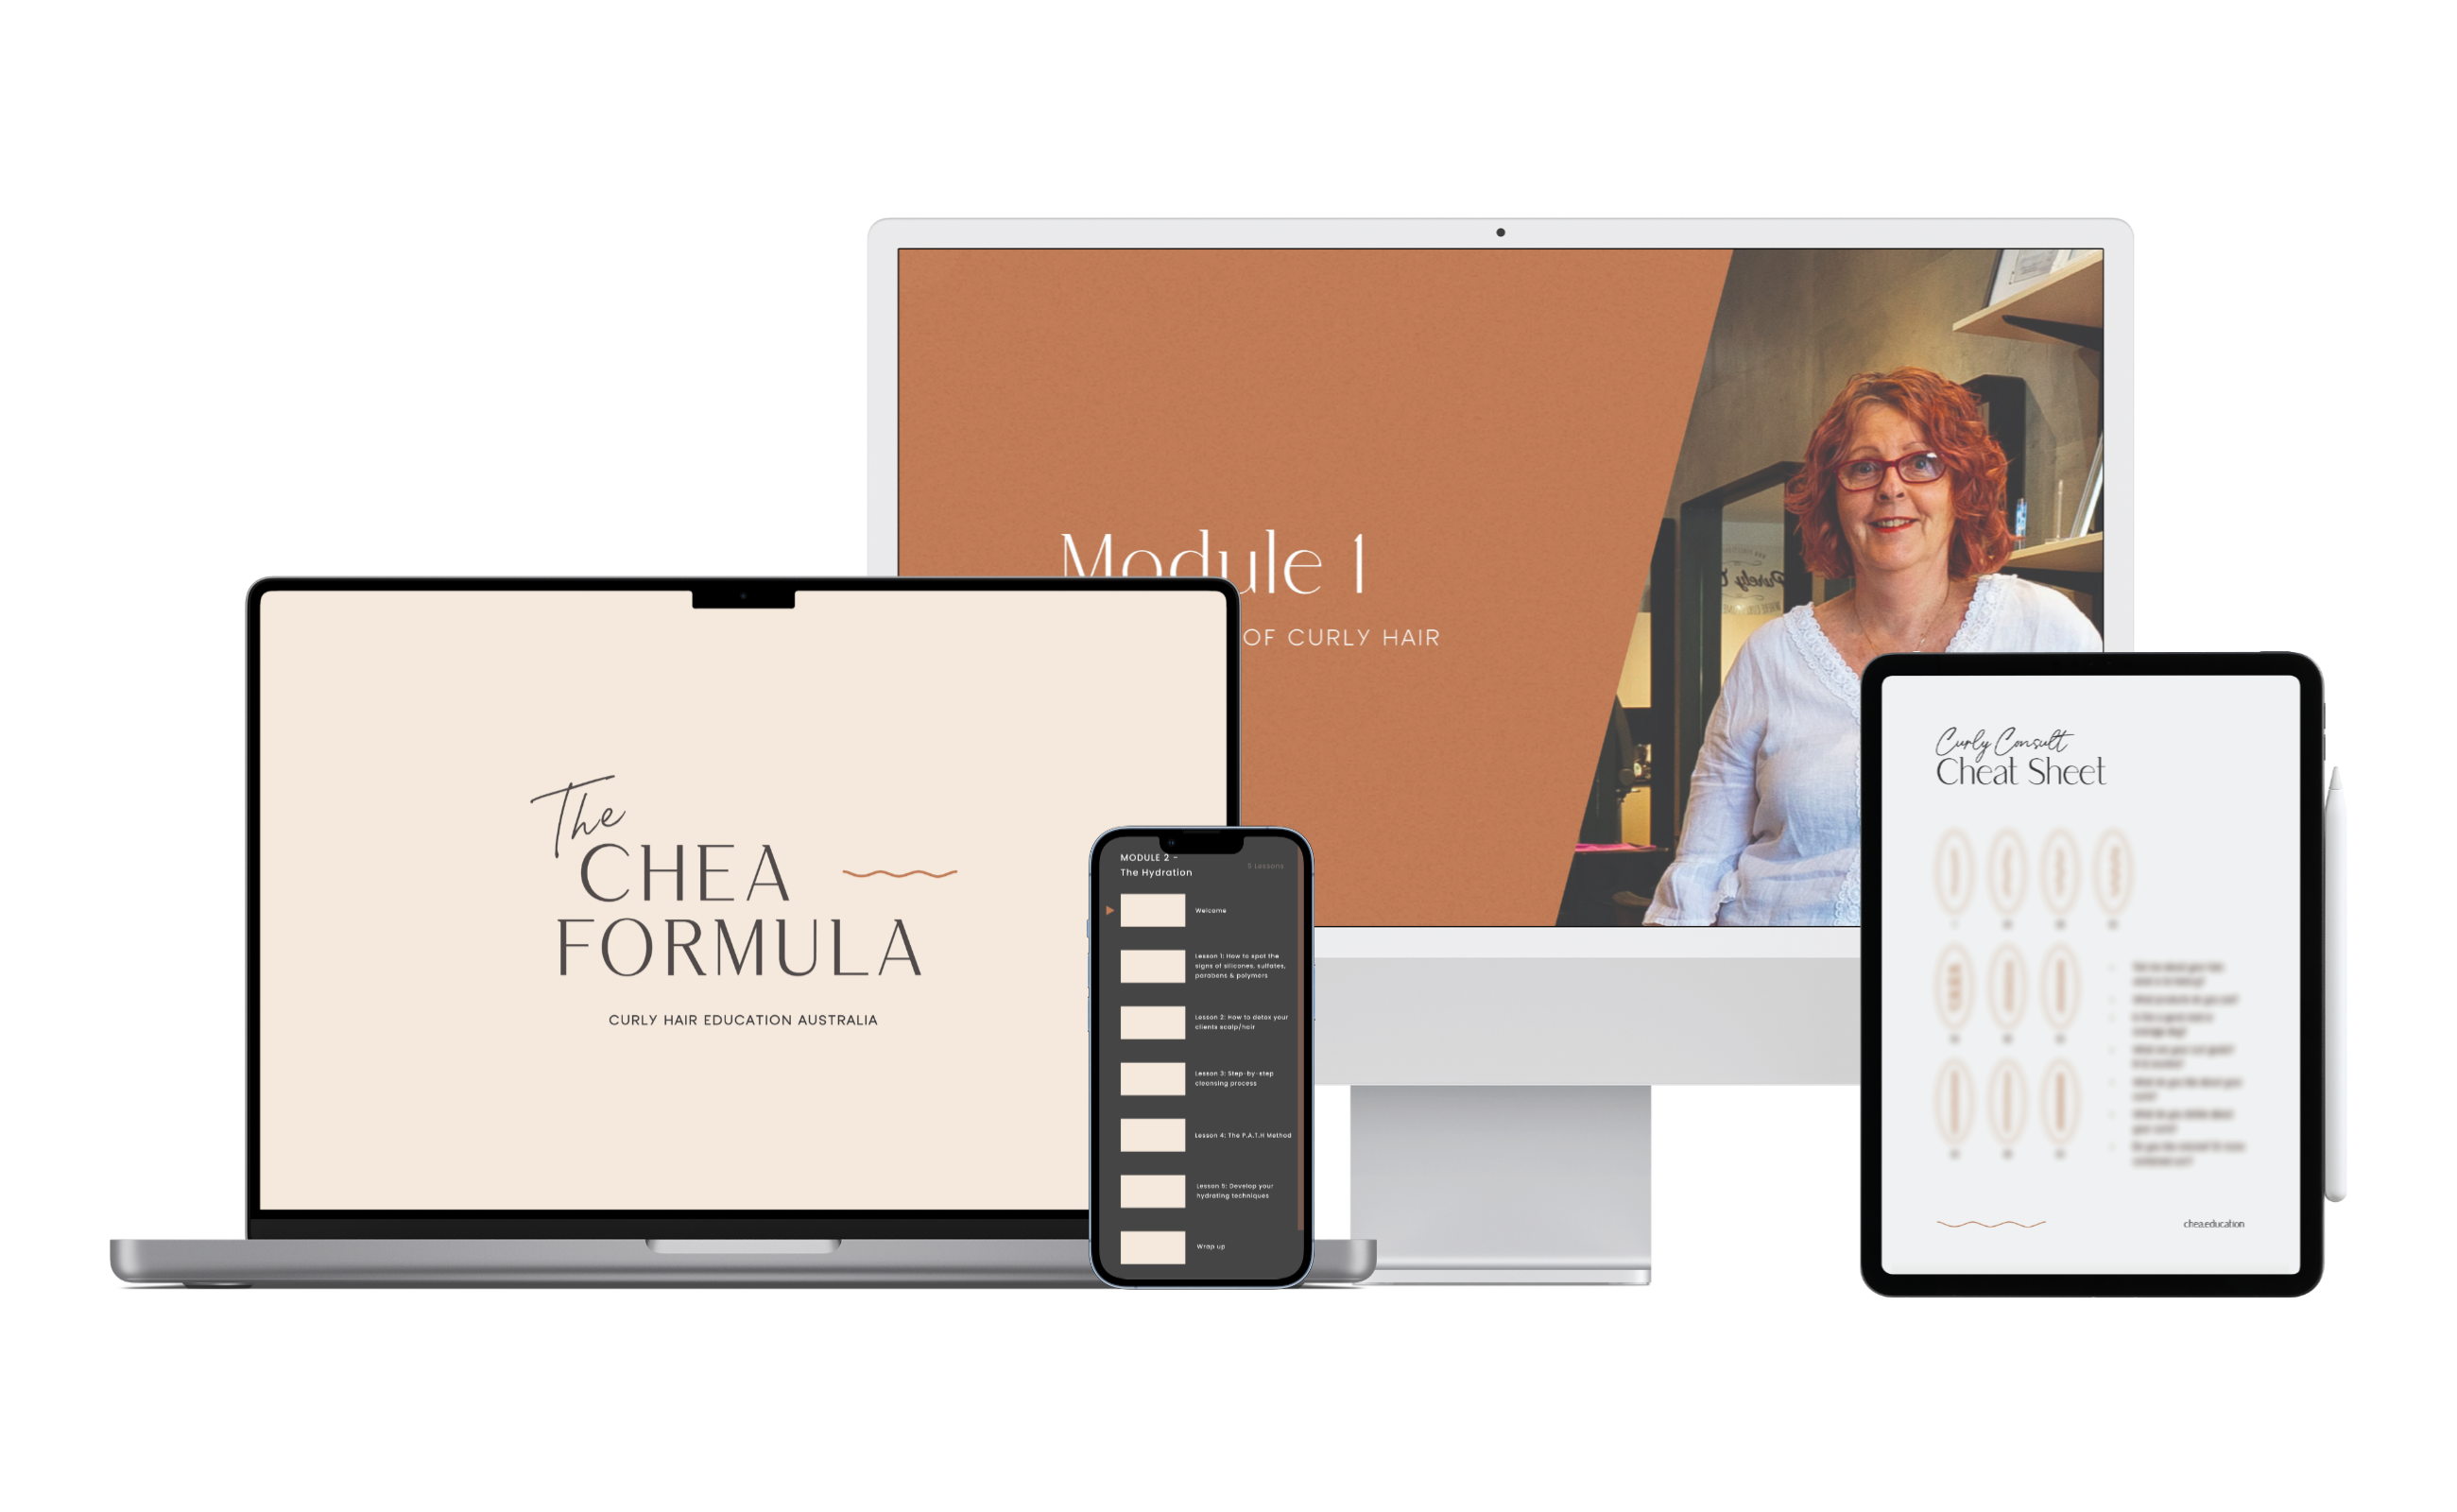 The CHEA Formula course material teaser displayed on a range of Apple devices.